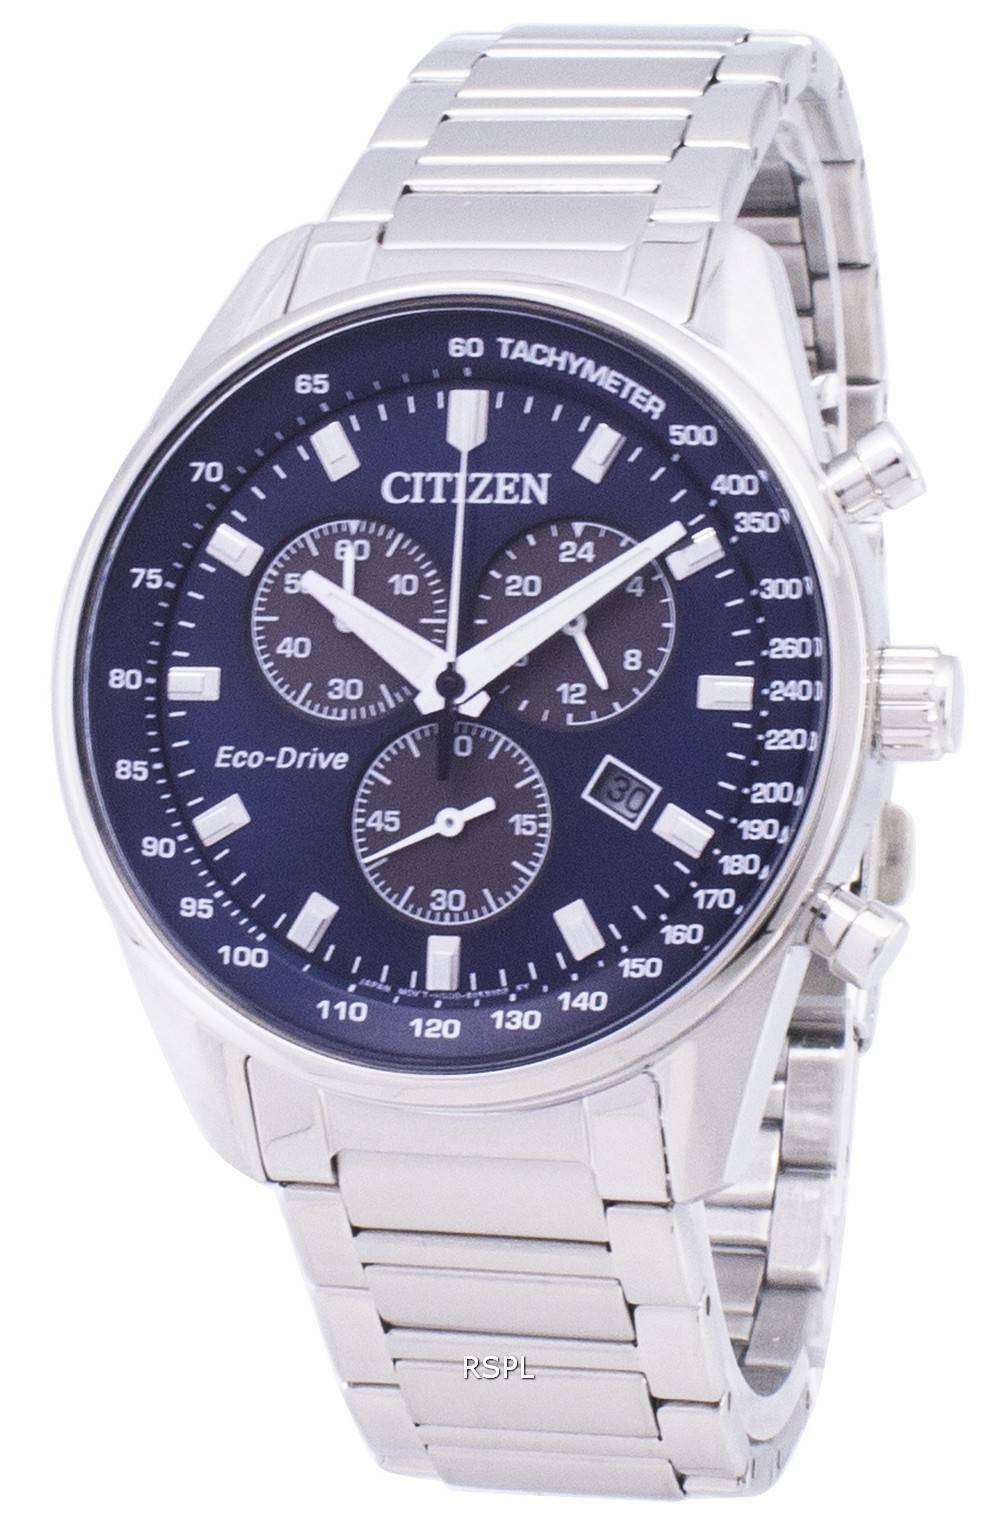 citizen-eco-drive-at2390-82l-chronograph-men-s-watch-citywatches-co-uk